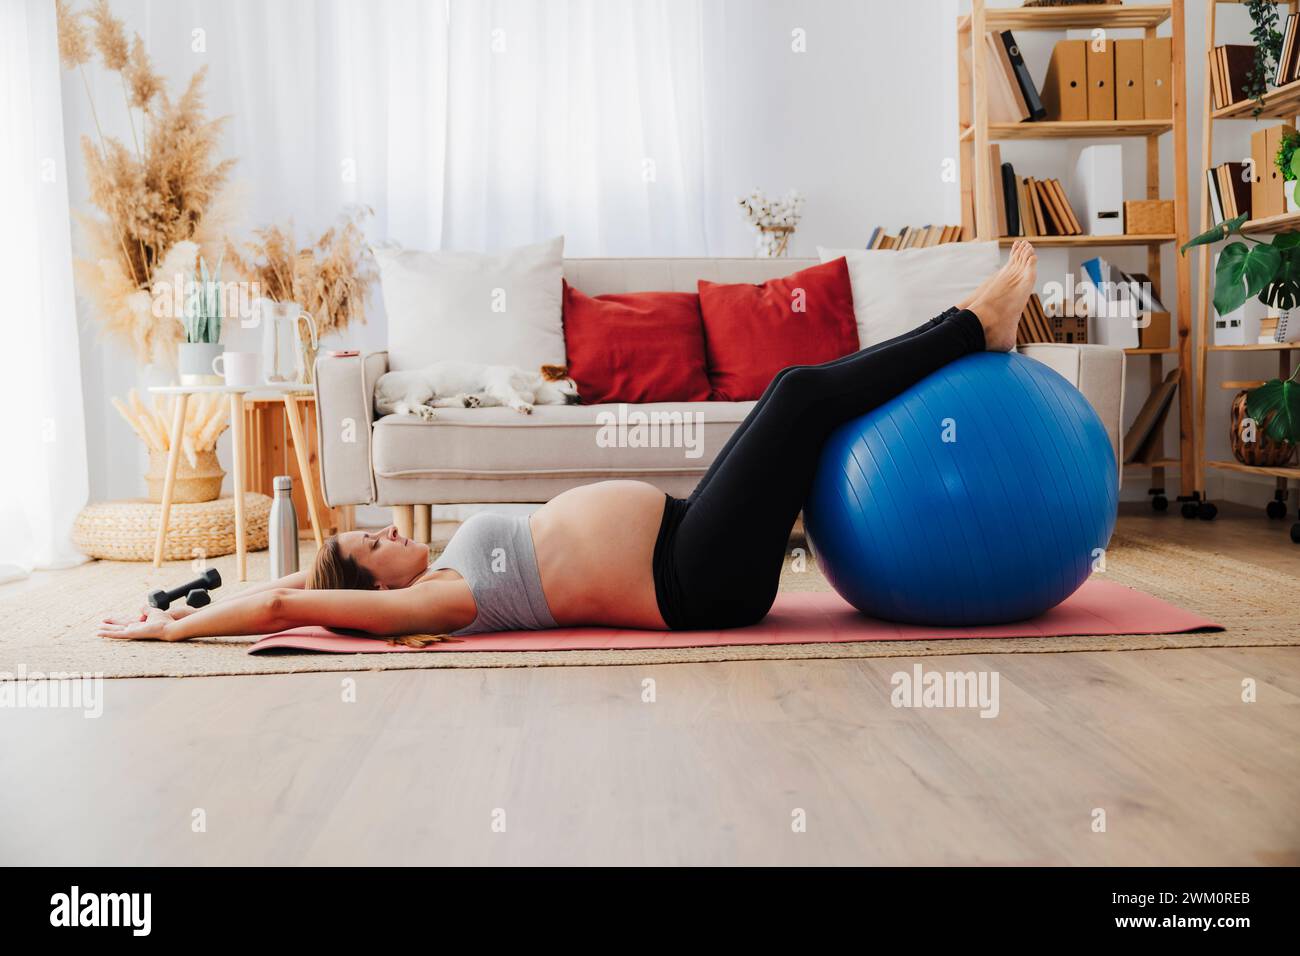 Pregnant woman lying on exercise mat with fitness ball in living room Stock Photo